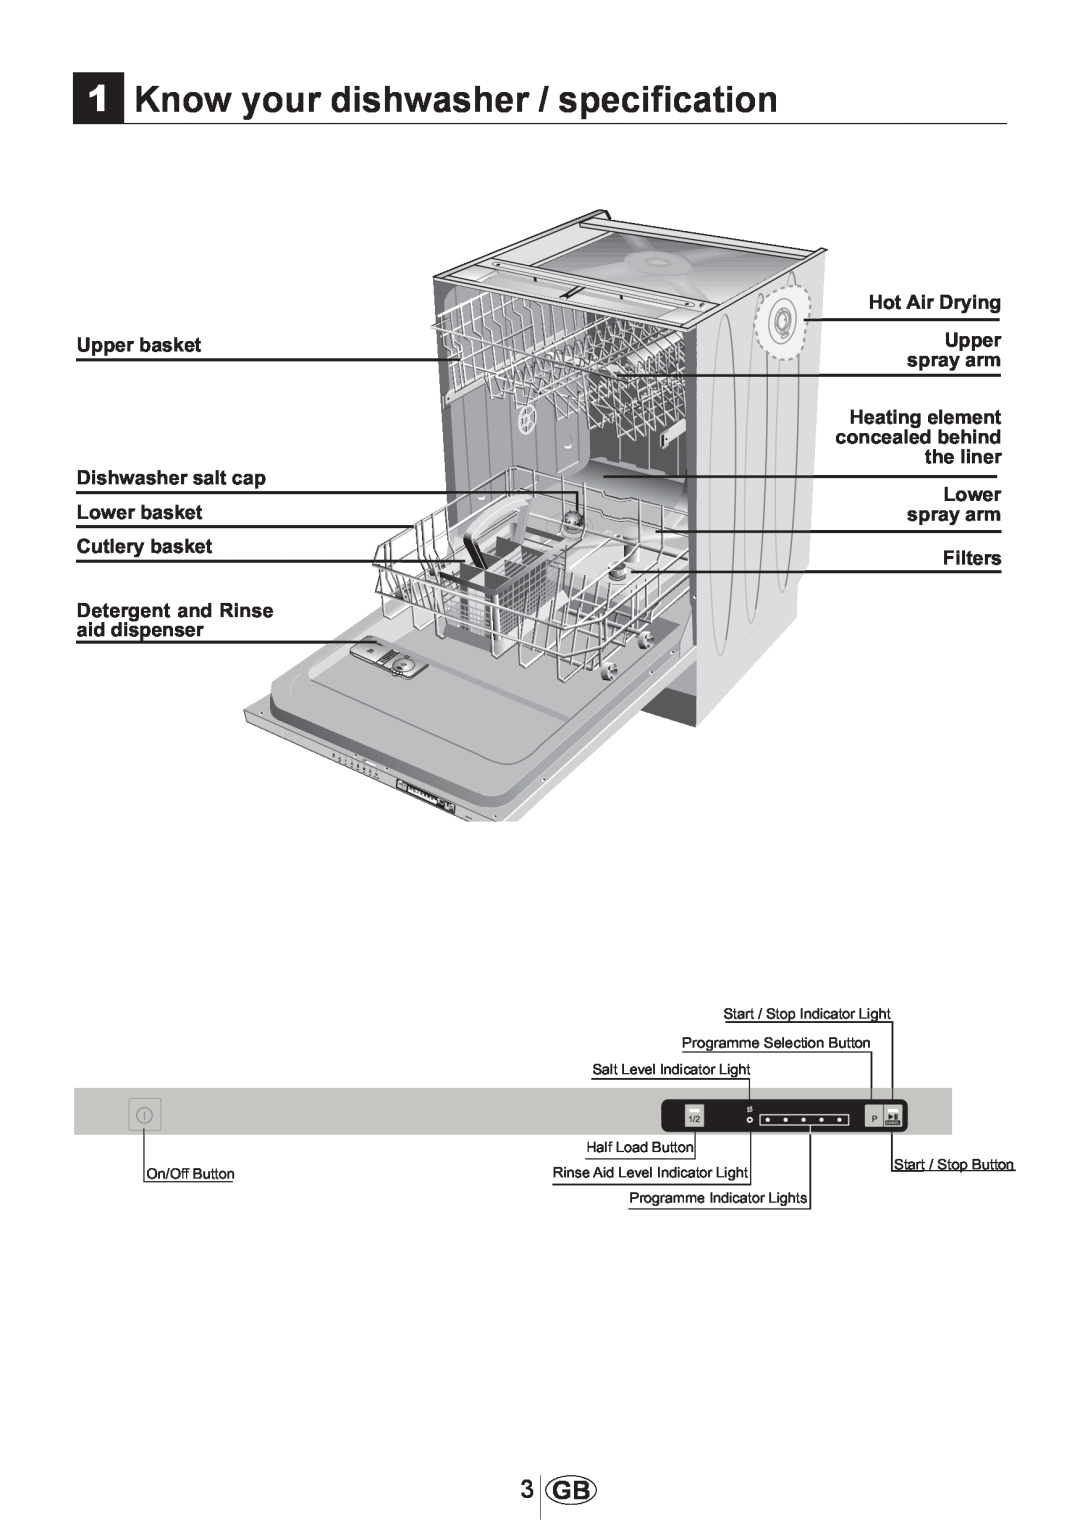 Beko DW602 manual 1Know your dishwasher / specification 